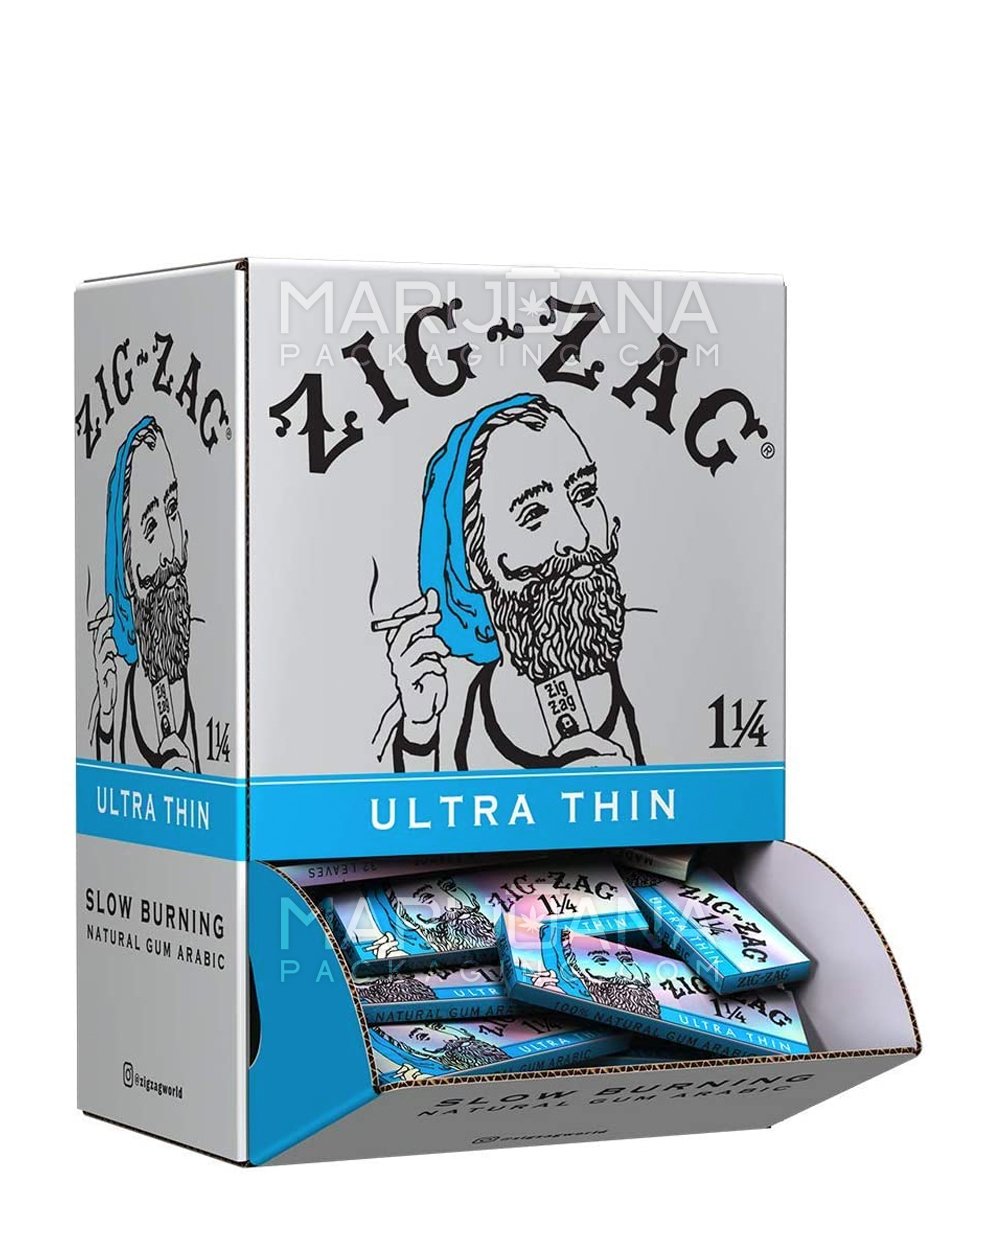 ZIG ZAG | 'Retail Display' Ultra Thin 1 1/4 Size Rolling Papers | 78mm - White Paper - 48 Count - 1